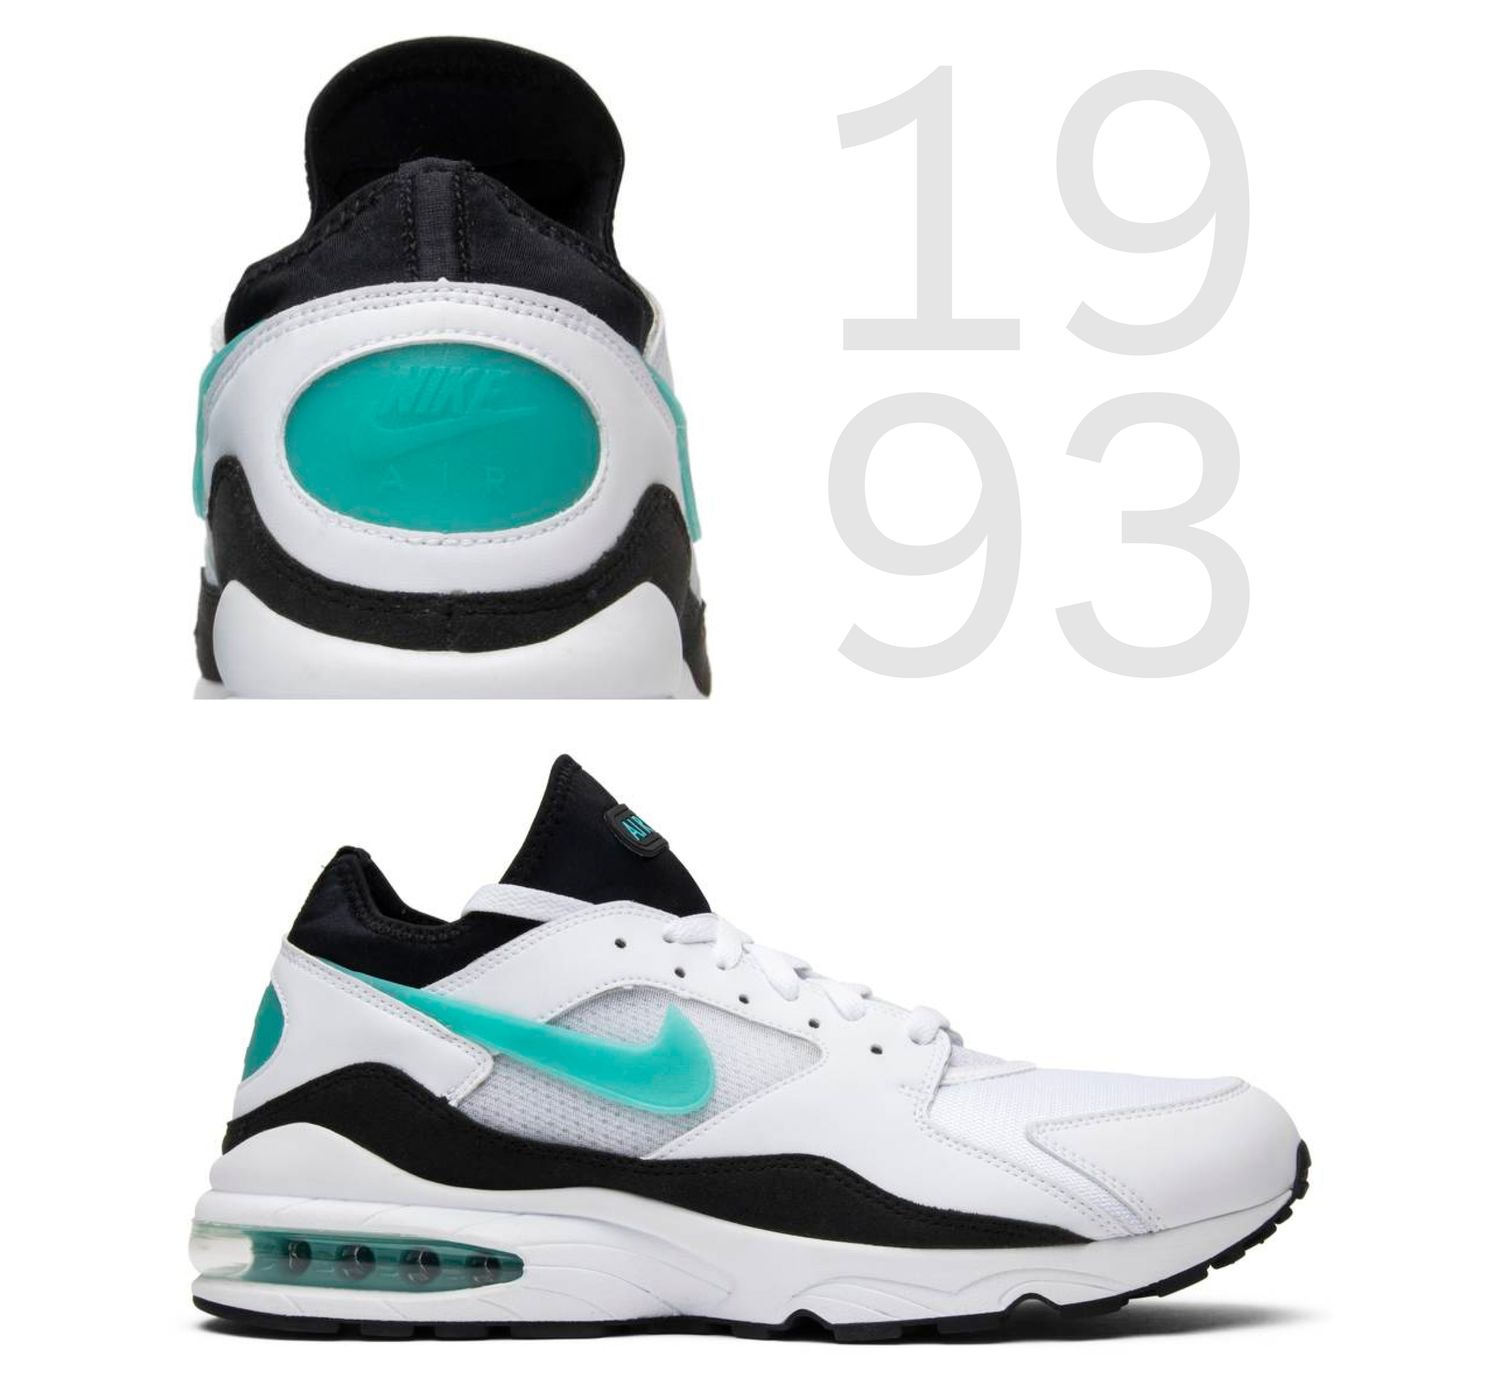 Nike Air Max Day History & Sneaker Release Facts You Need to Know